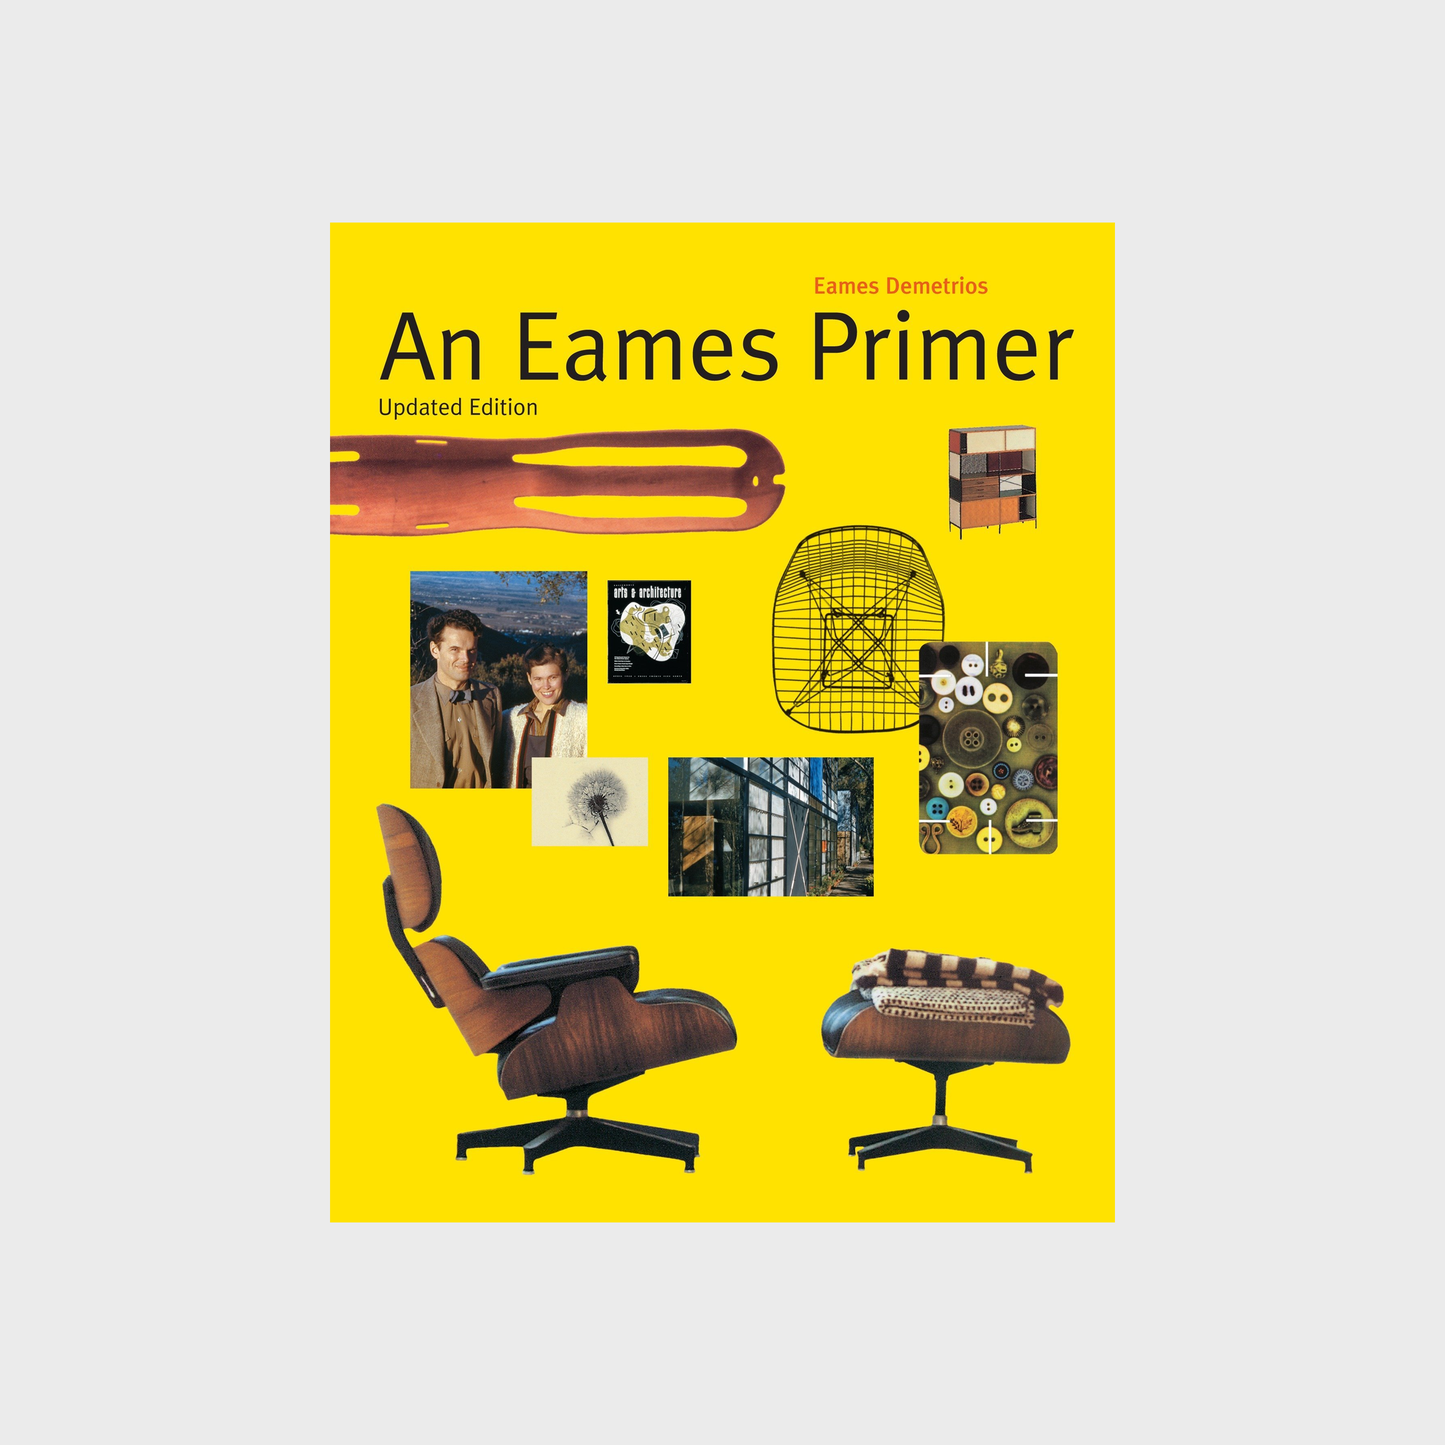 An Eames Primer: Revised Edition by Eames Demetrios